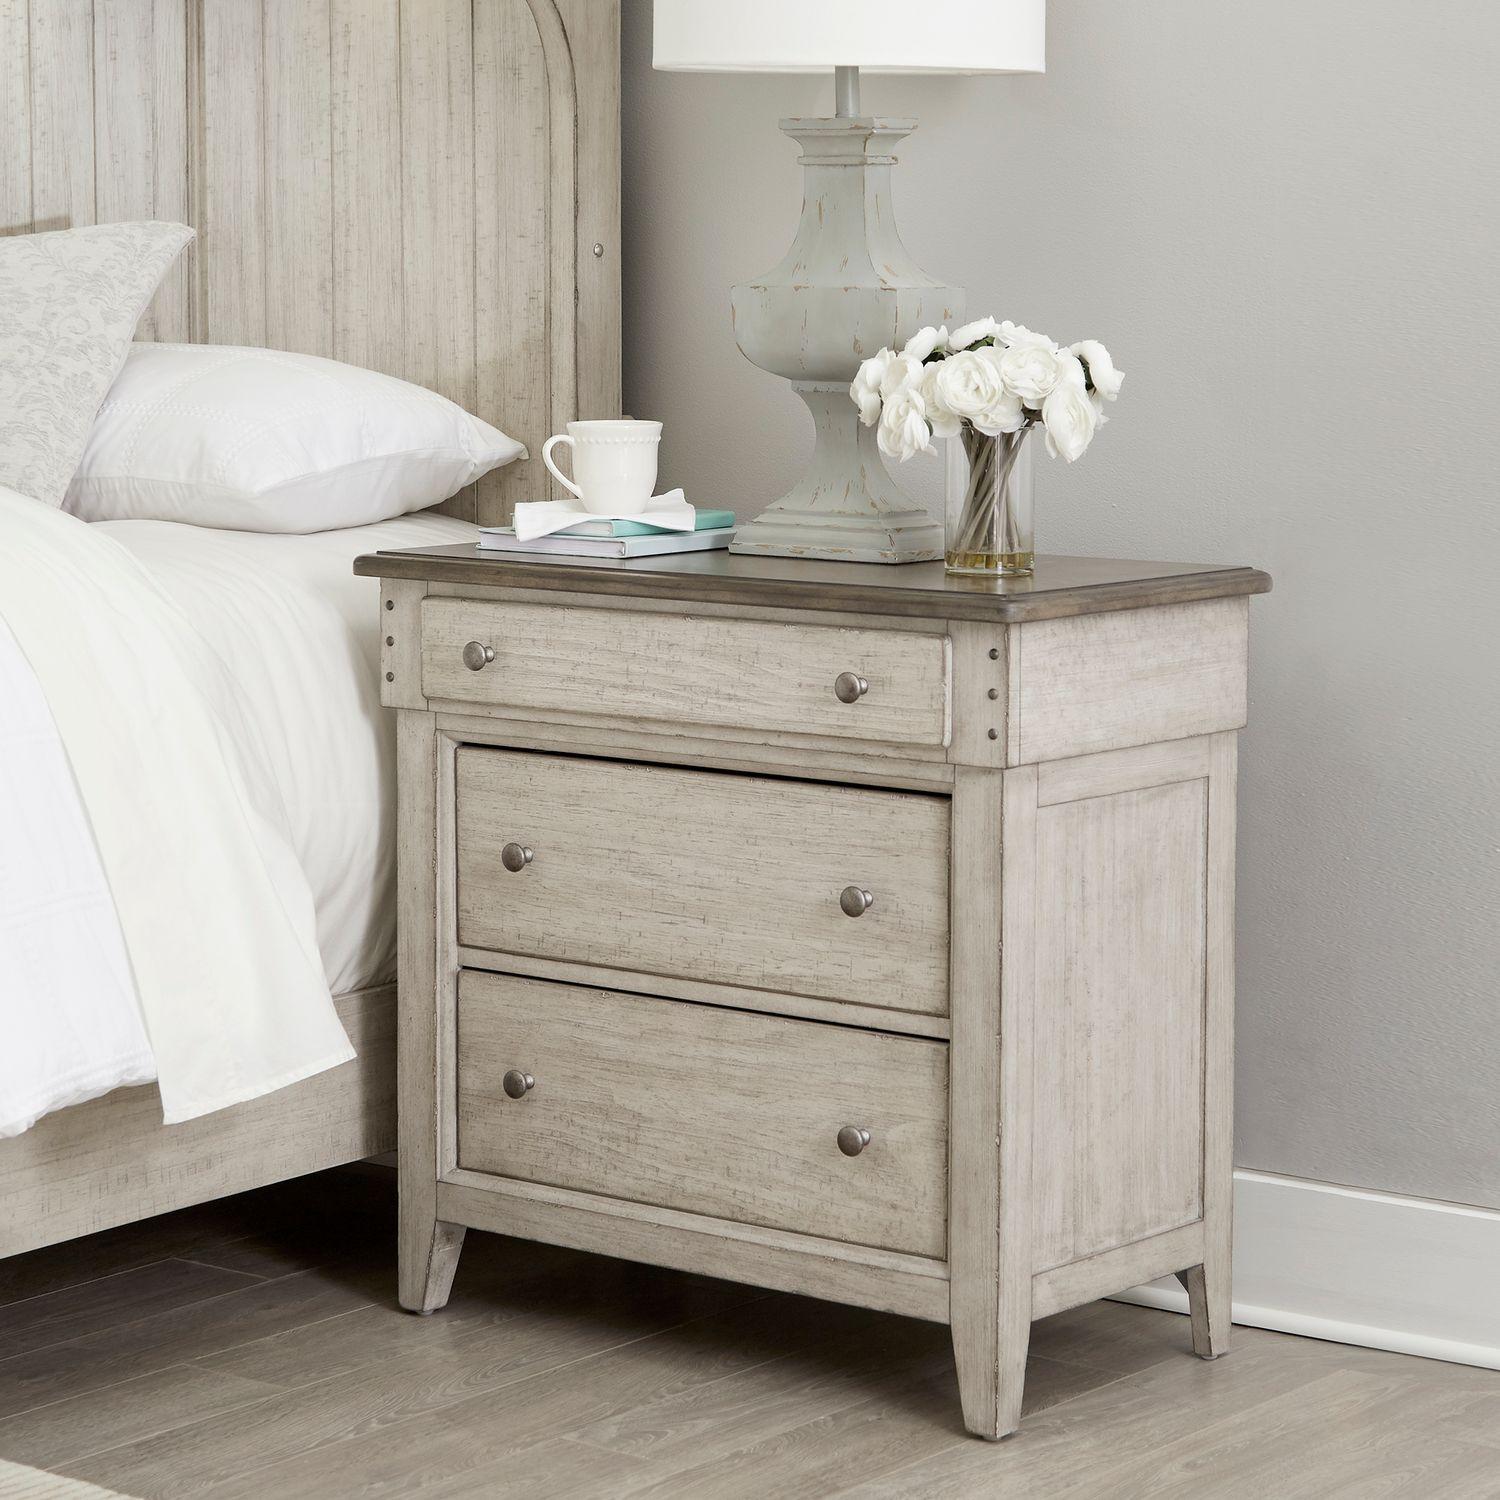 Contemporary, Cottage Bedside Chest Ivy Hollow (457-BR) 457-BR62 in Taupe 